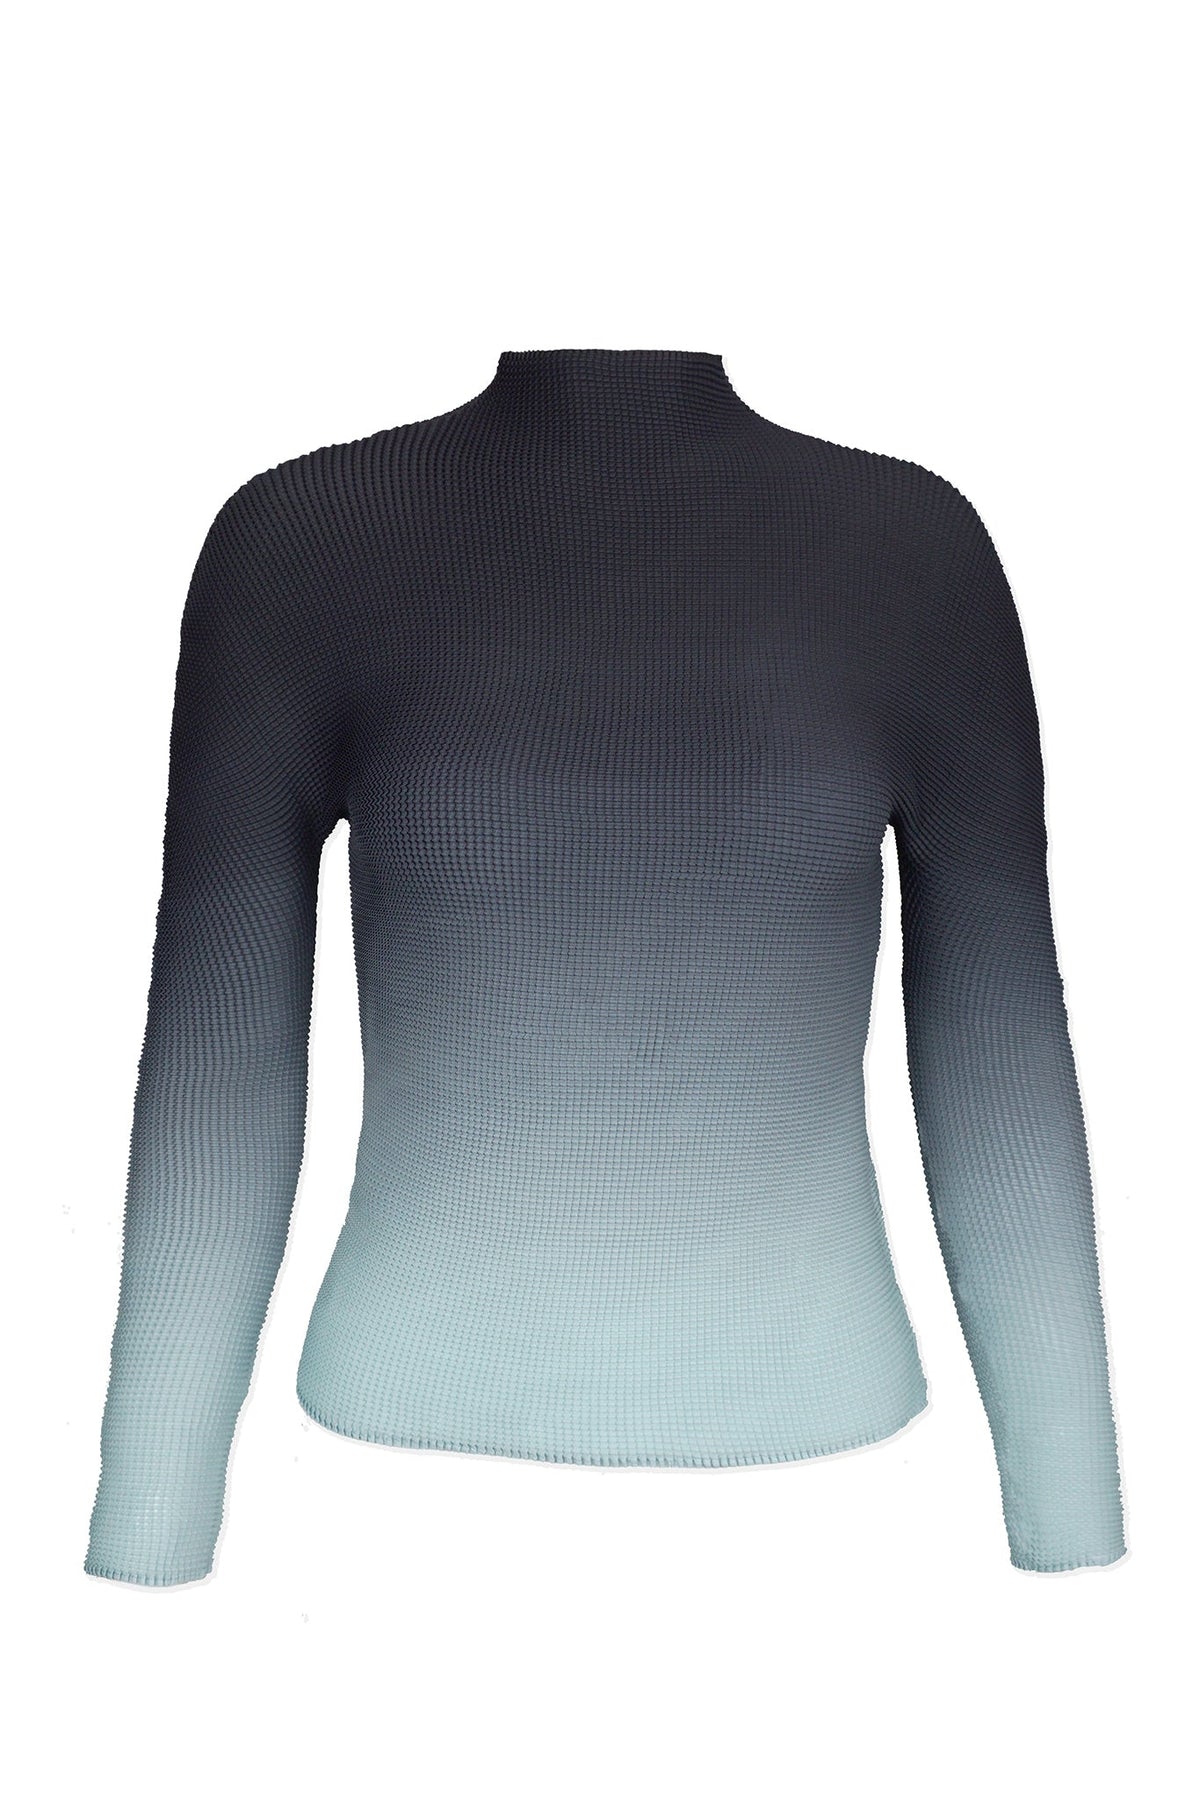 (BACK IN STOCK!) Kate Ombre 3D Honeycomb Top